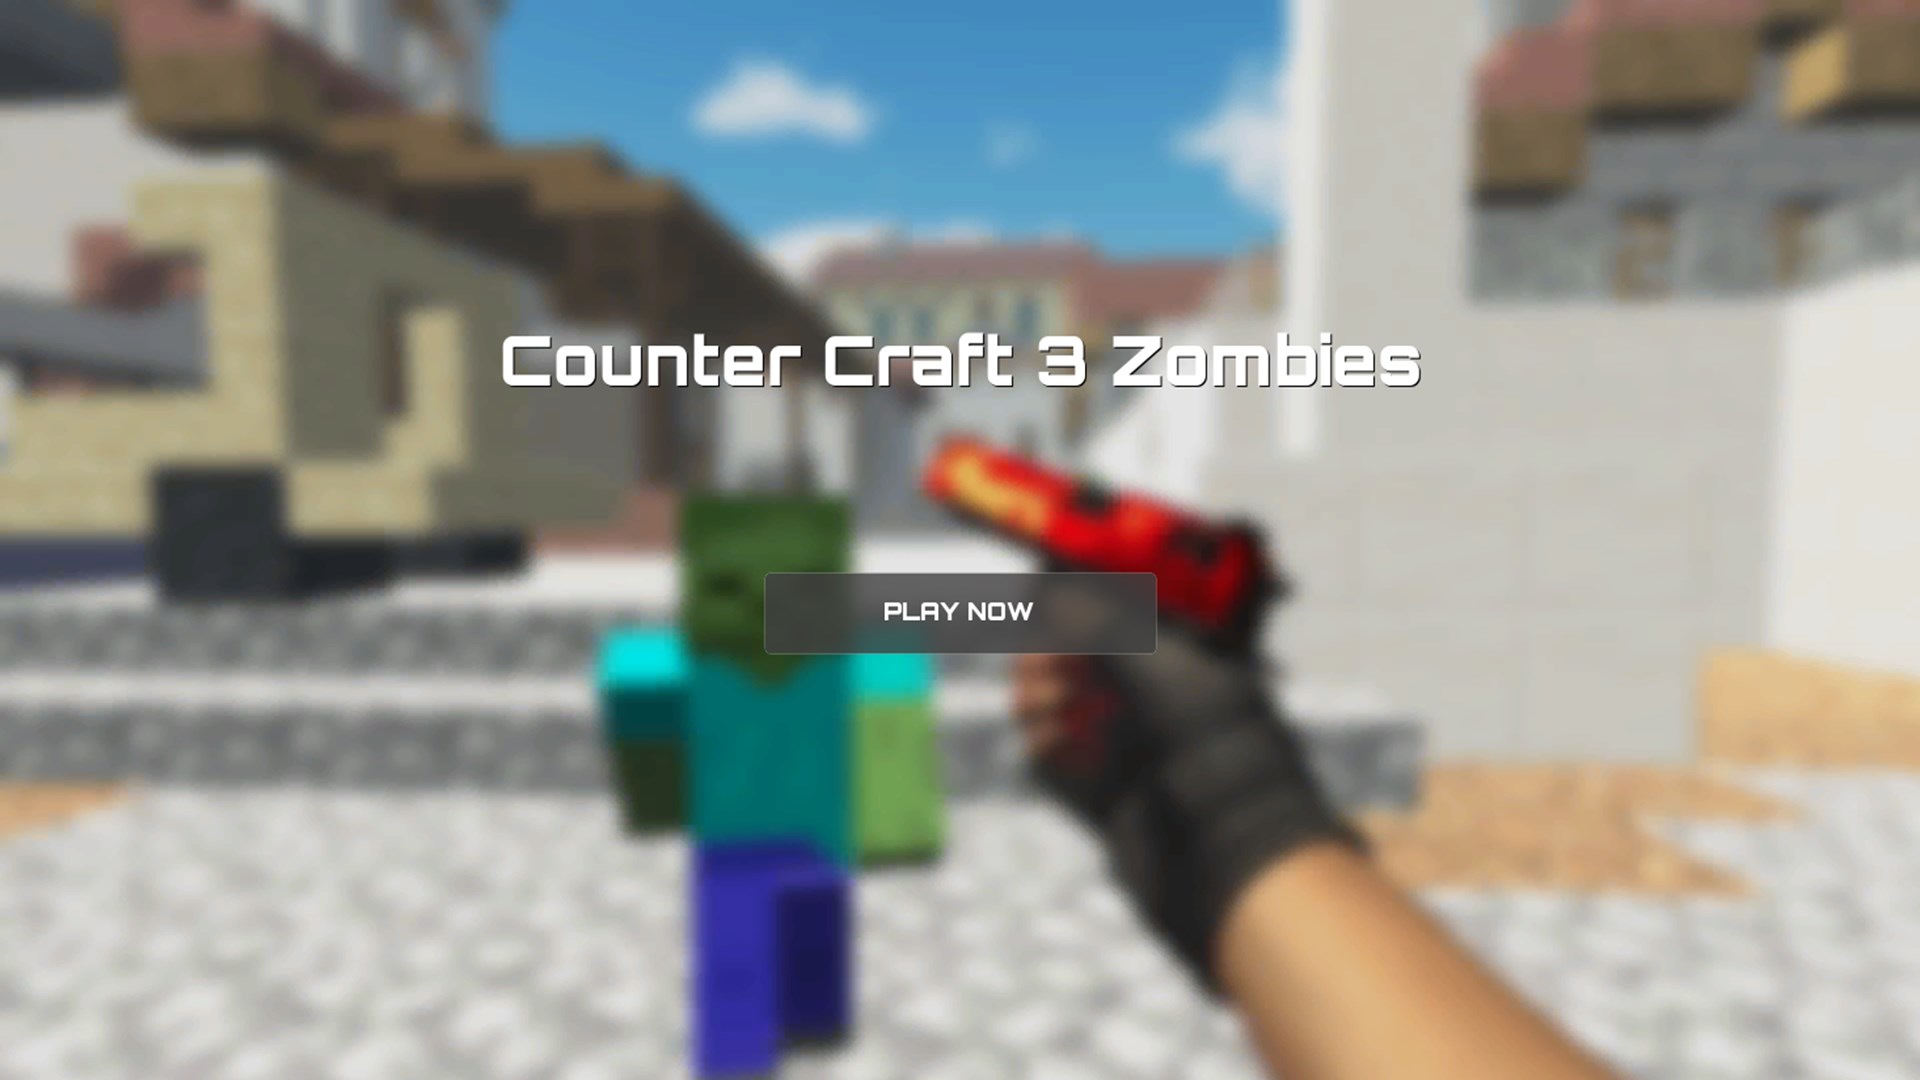 Get Counter Craft 3 Zombies